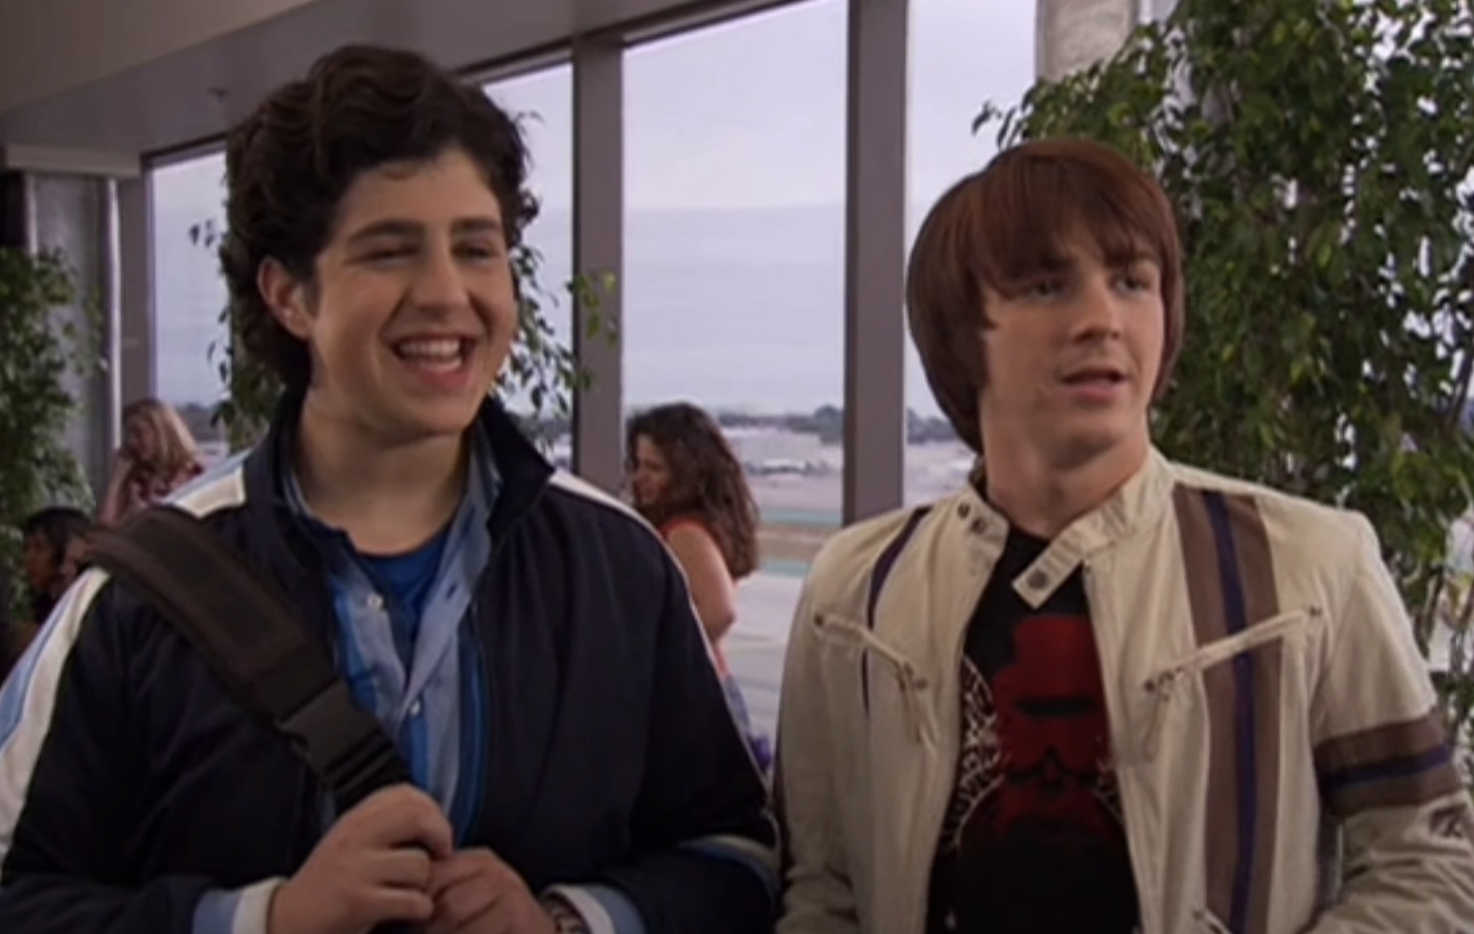 Two characters from a TV show, one with a backpack and the other in a jacket, are indoors with a view of the ocean through a window behind them